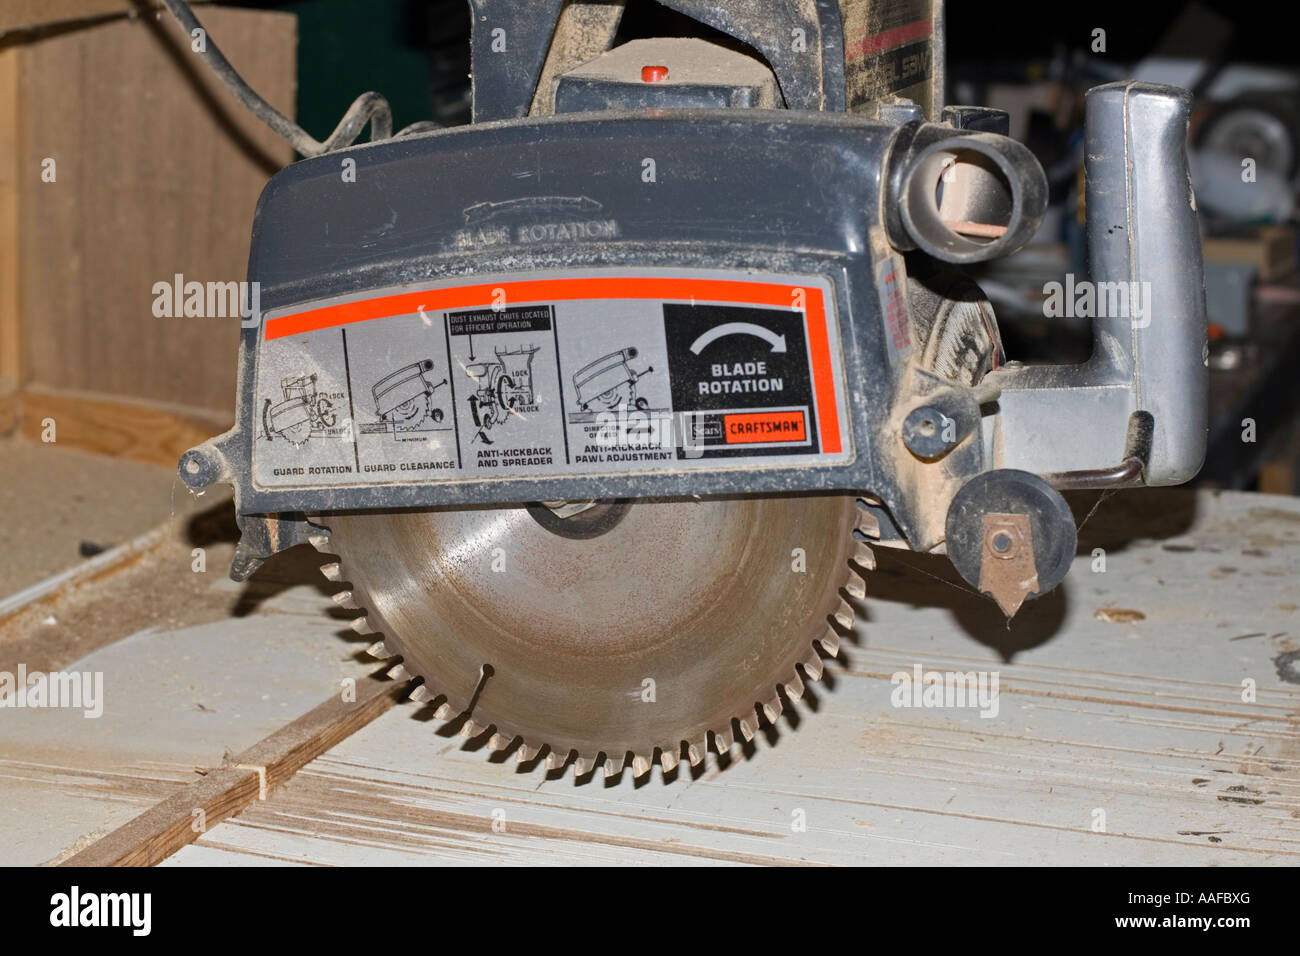 Download Radial Arm Saw Stock Photos & Radial Arm Saw Stock Images - Alamy